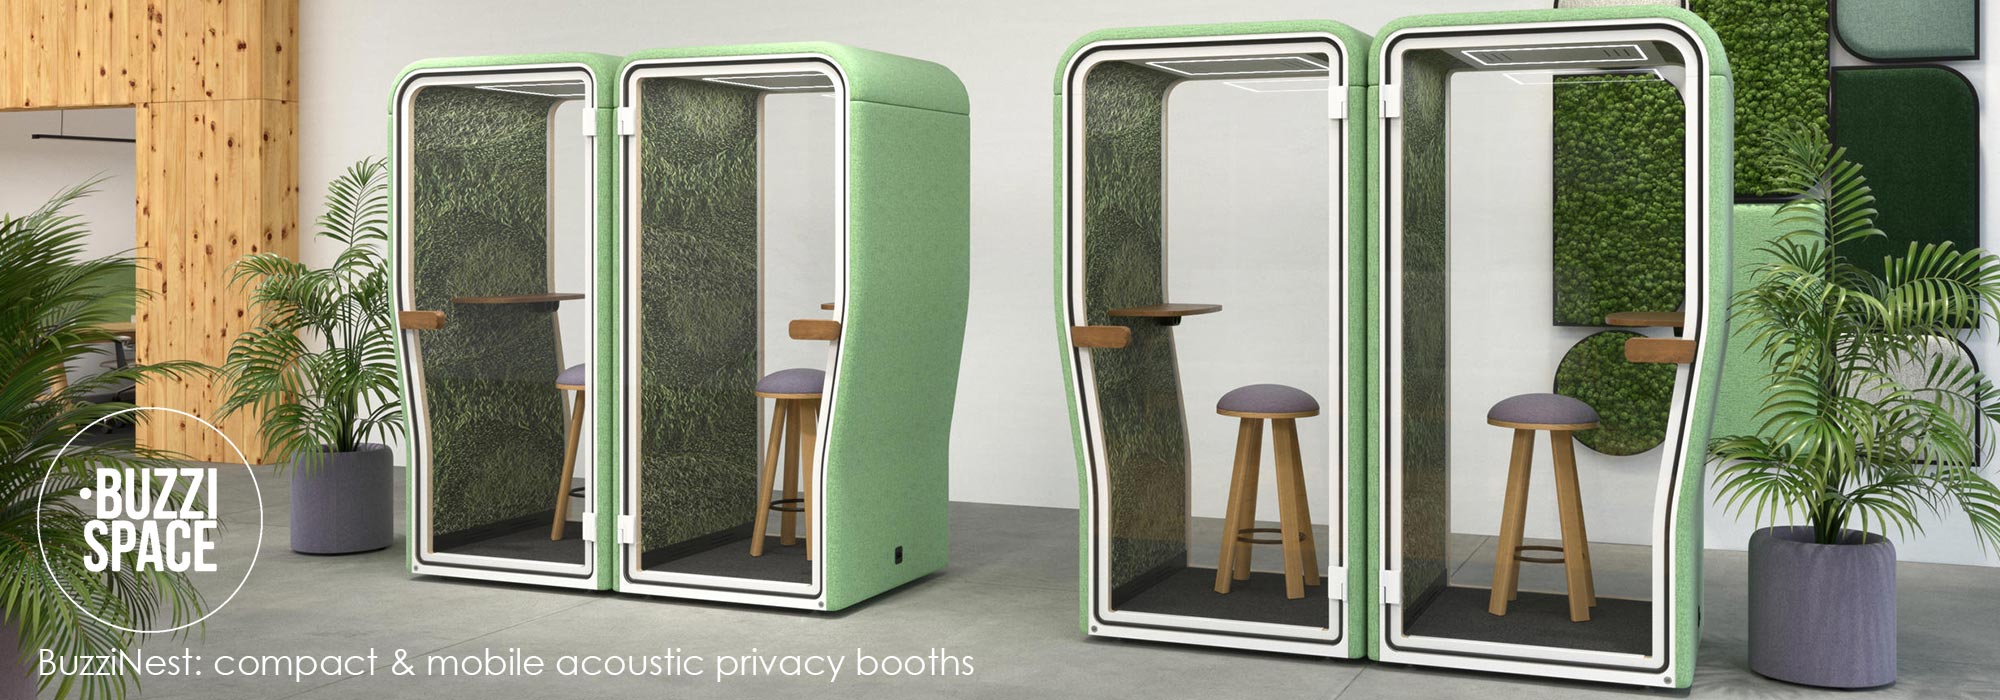 BuzziSpace BuzziNest compact mobile acoustic privacy booths